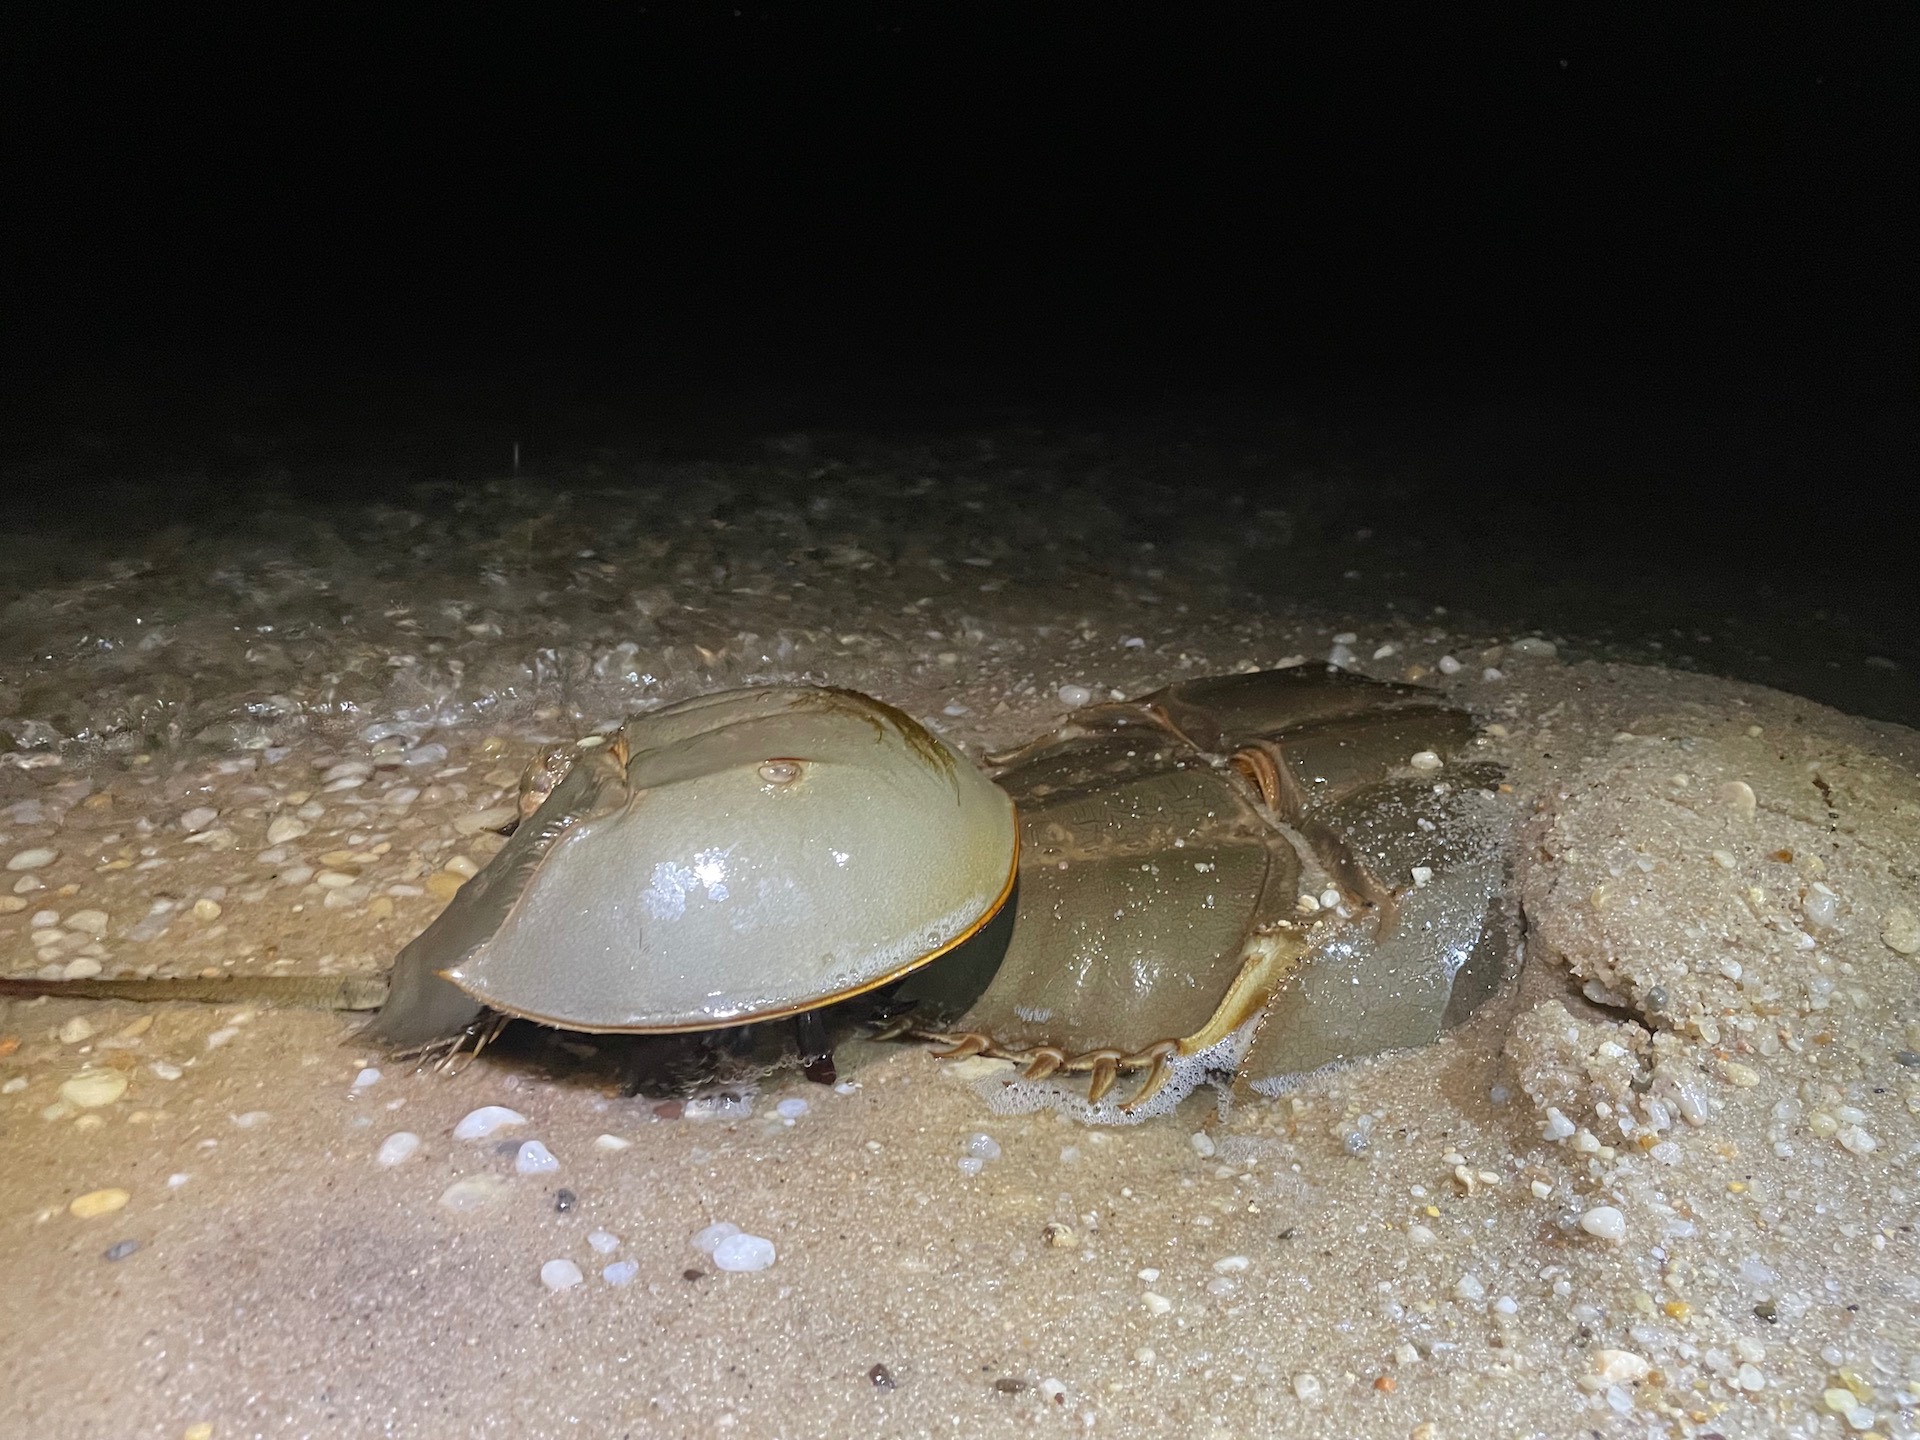 Horseshoe crabs in shallow water, spawning